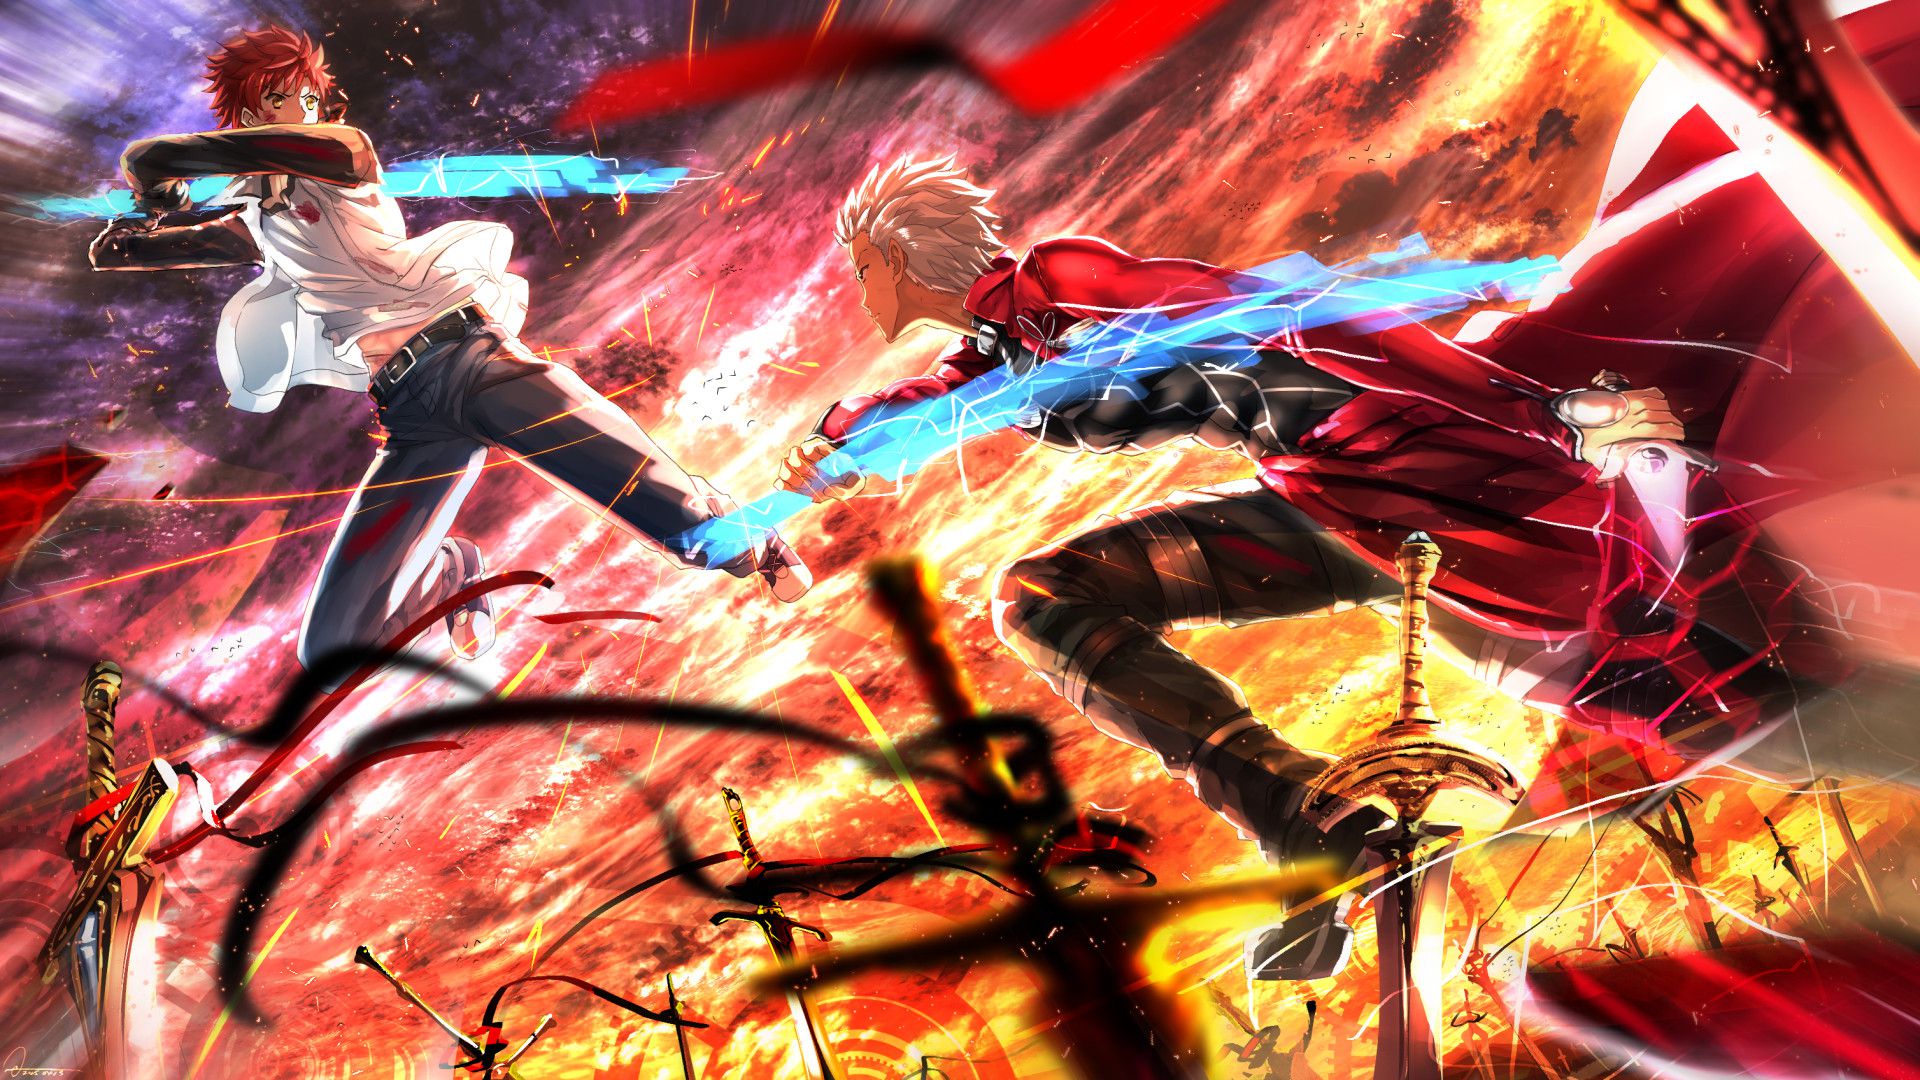 Fate/stay night other fate series wallpaper 01 [28] * the size difference with 3